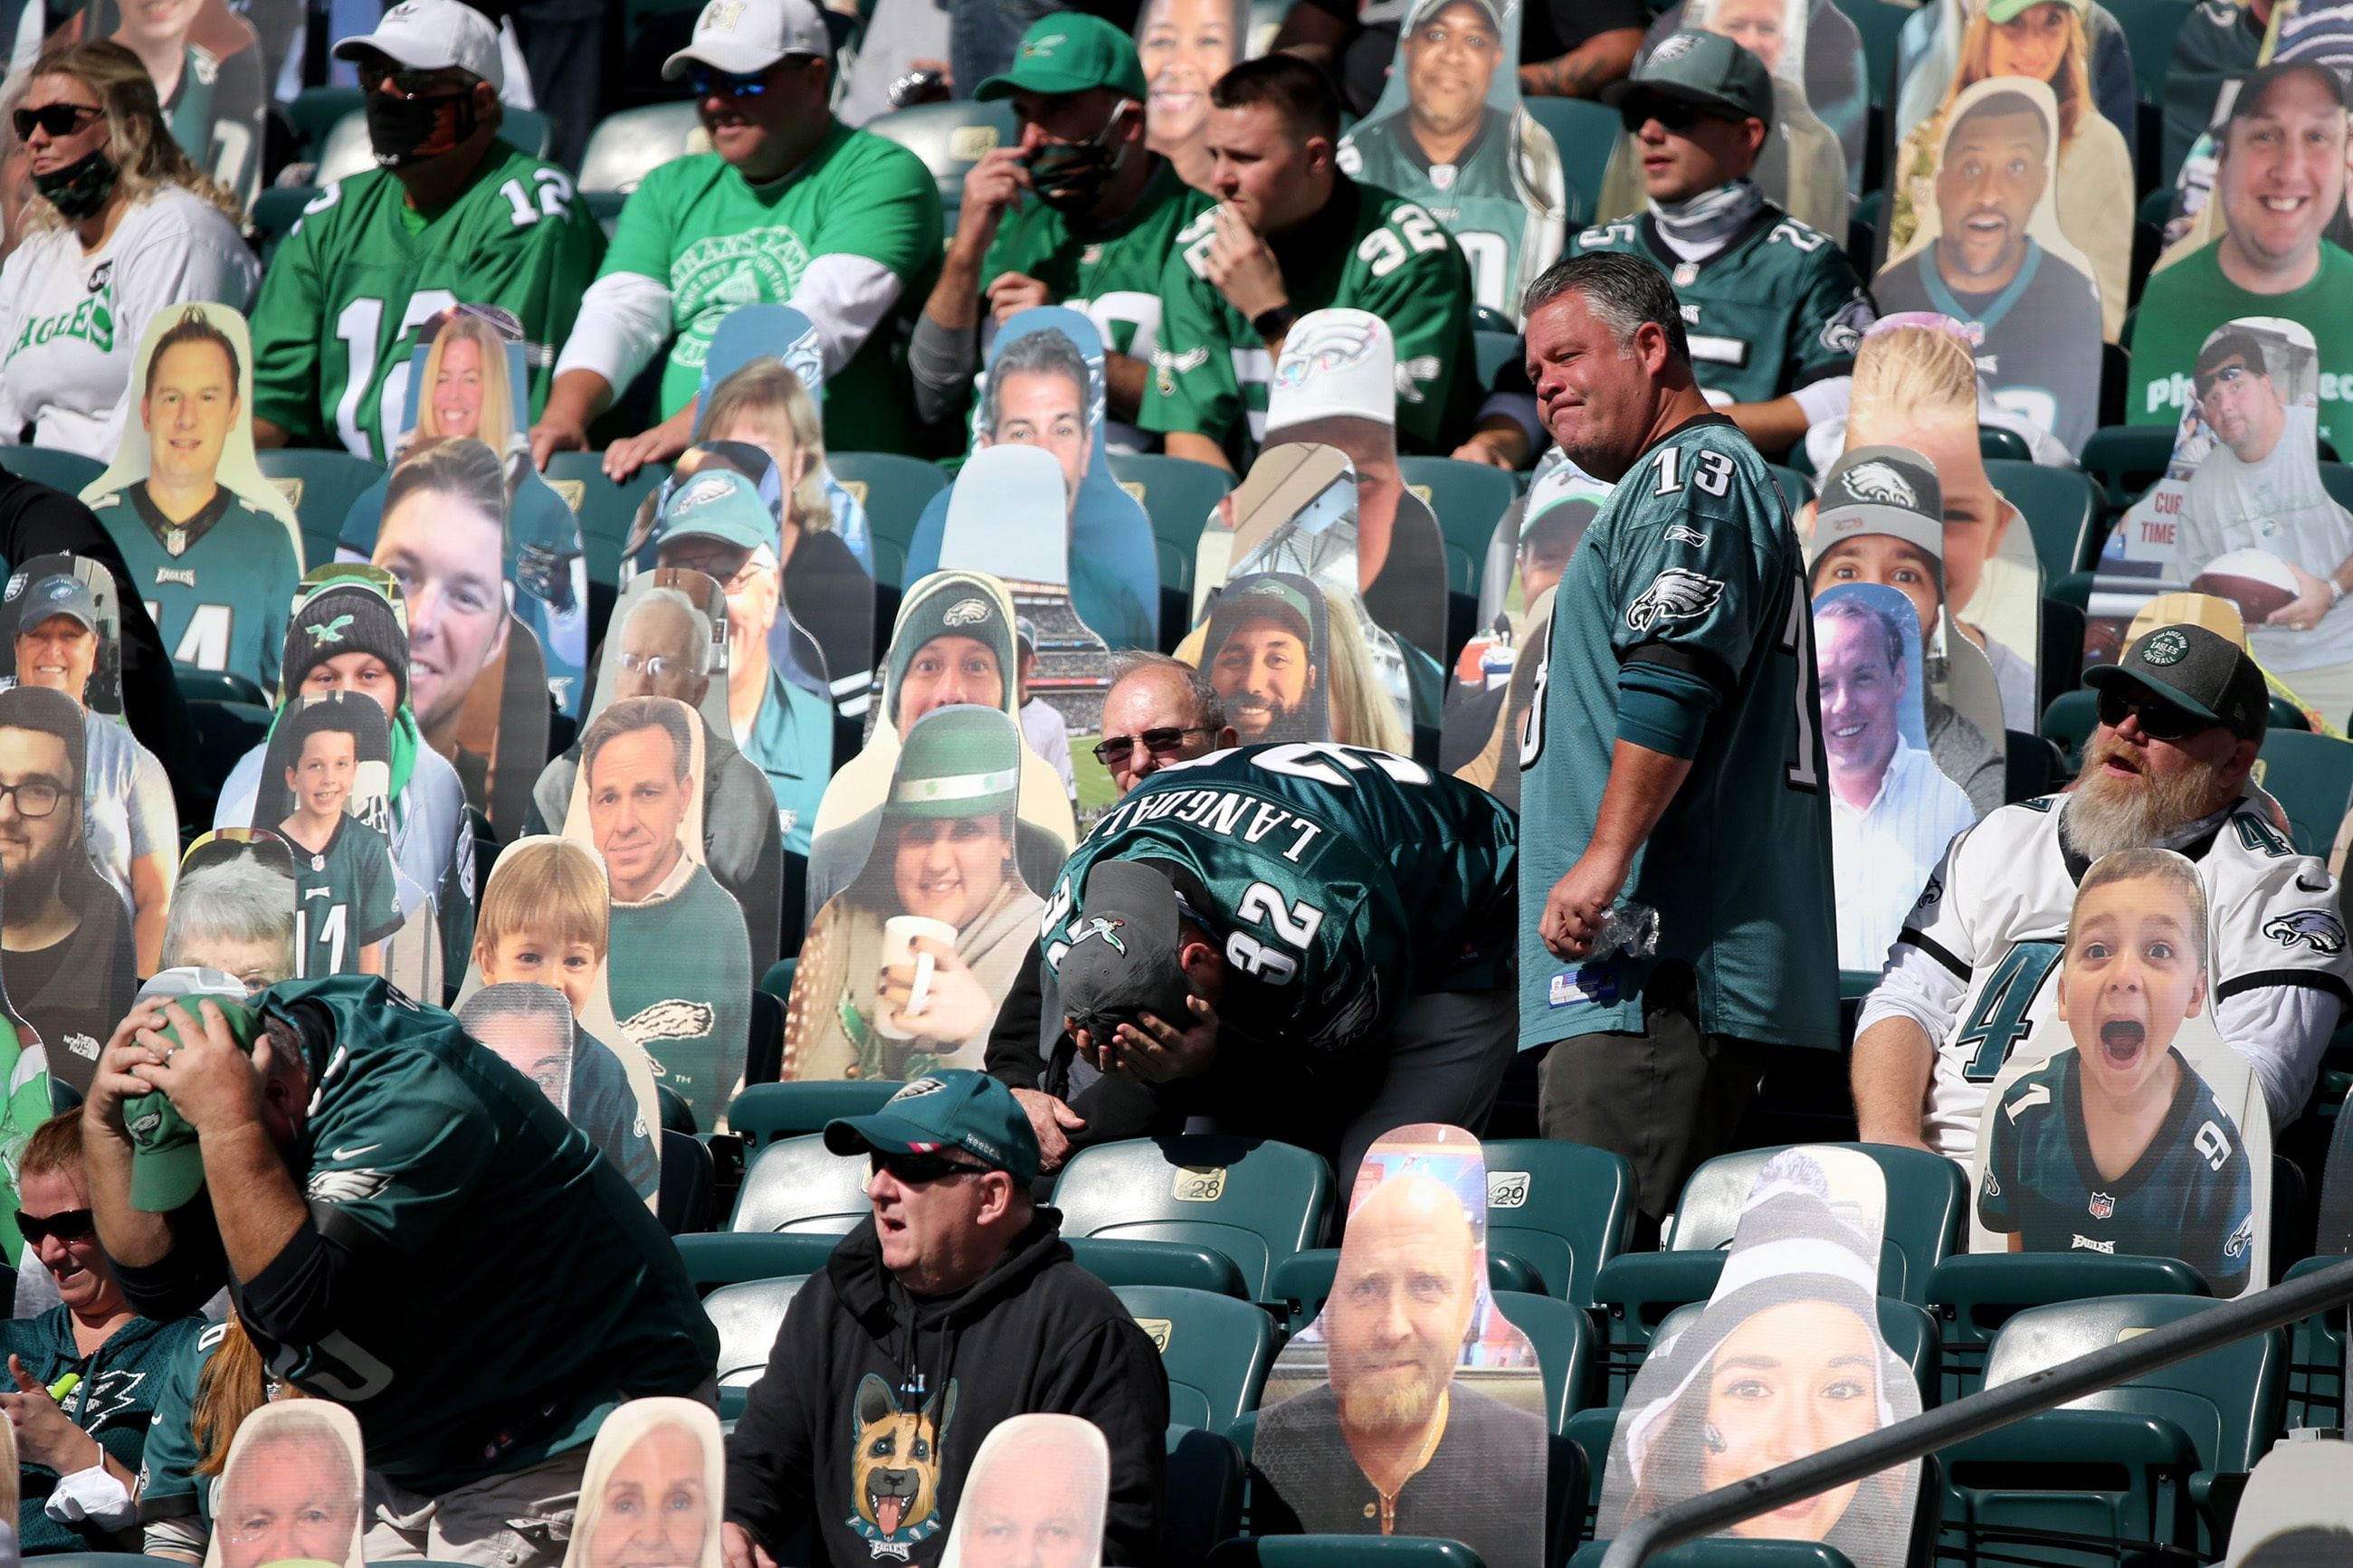 Eagles Fans Fight In The Stands On Their First Day Back From COVID Lockdown  – OutKick